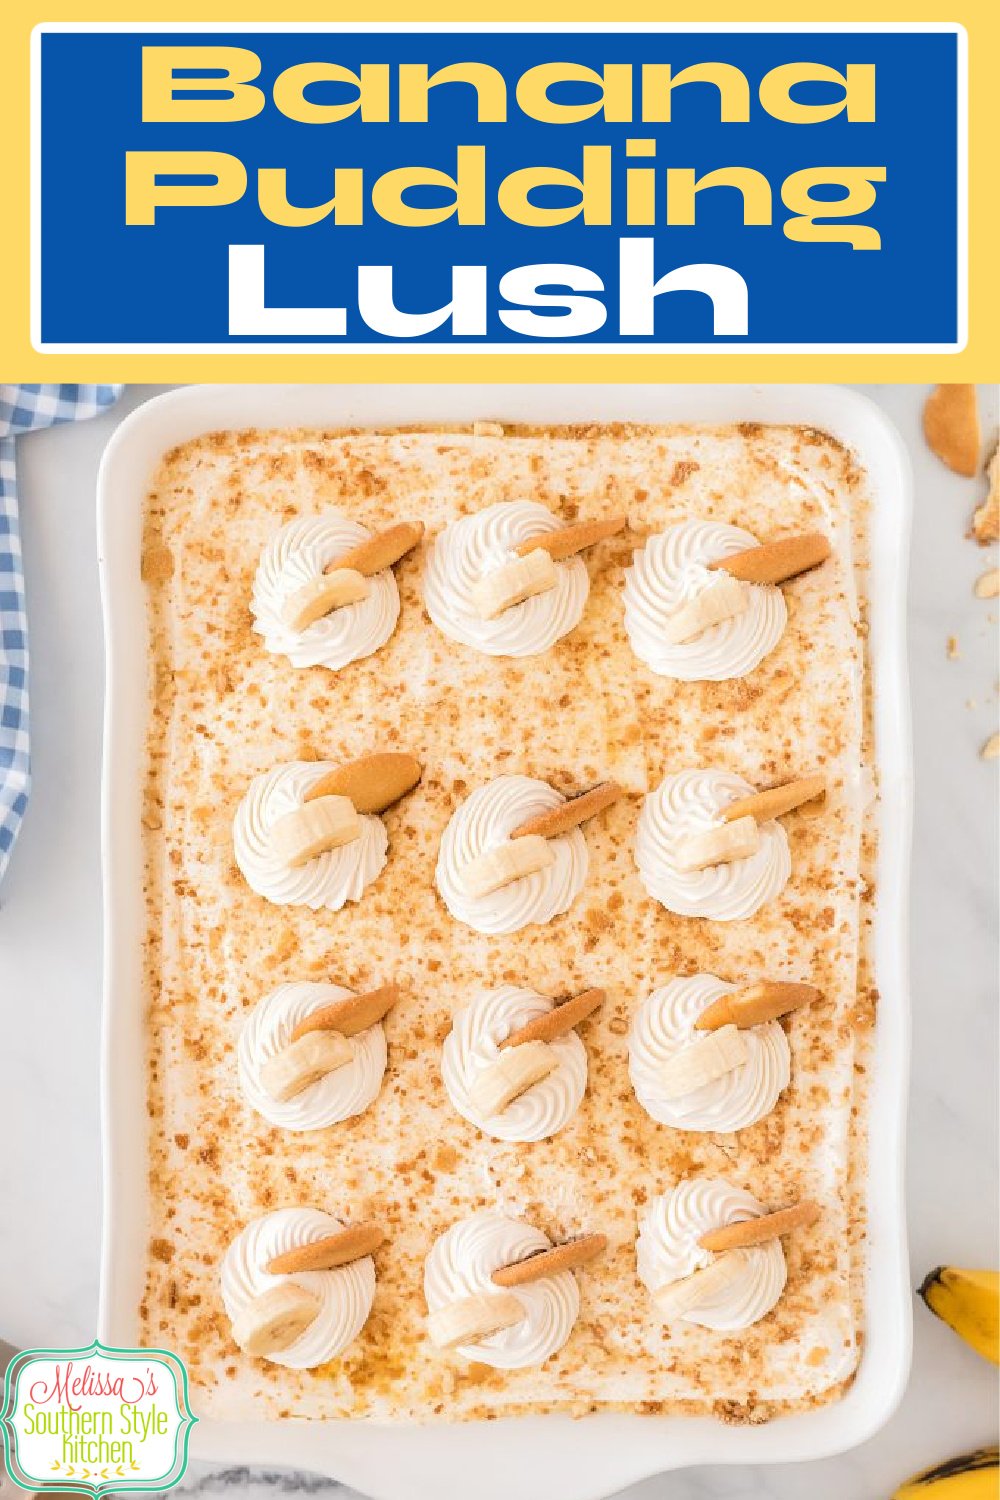 This layered Banana Pudding Lush will make a stellar addition to your desserts menu for casual family gatherings or holiday celebrations #bananapudding #bananapuddinglush #bananacreamlush #lushrecipes #layeredbananapuddinglush #southernstyle #southerndesserts via @melissasssk